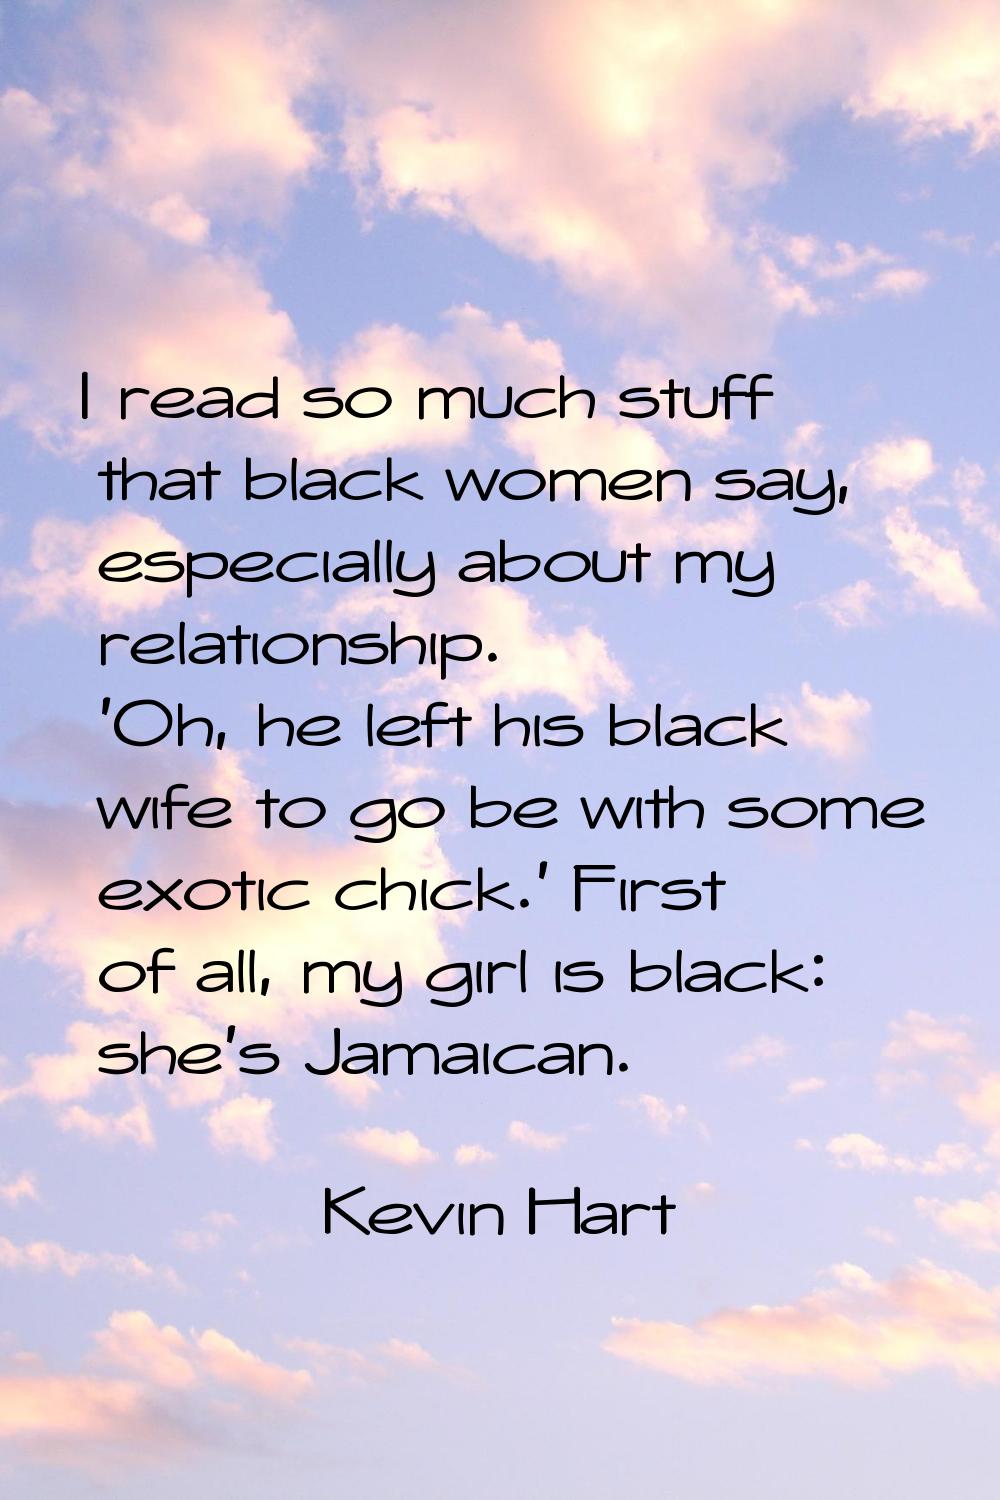 I read so much stuff that black women say, especially about my relationship. 'Oh, he left his black